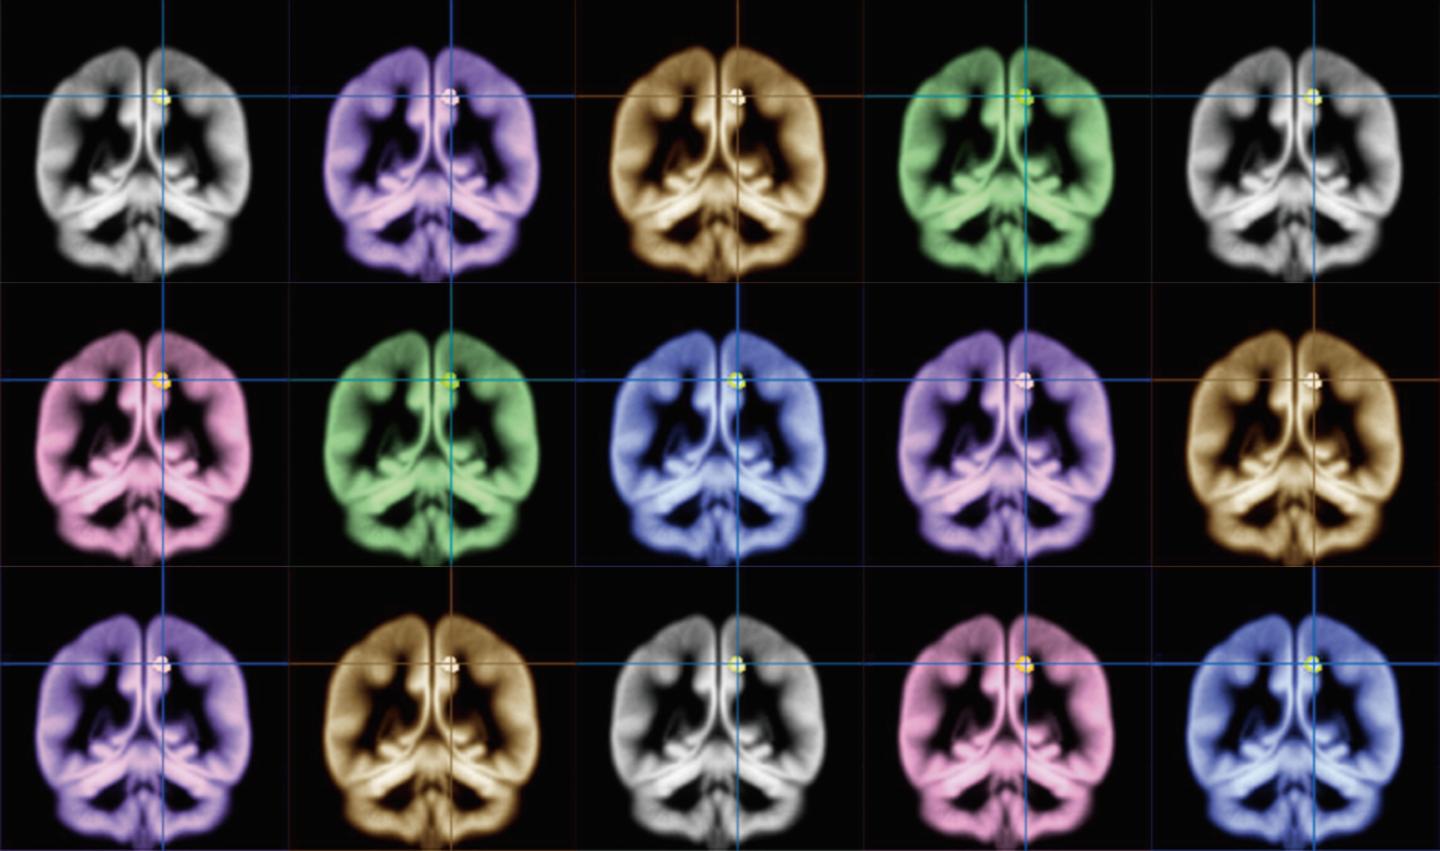 MRI Scans Show Happiness in the Brain